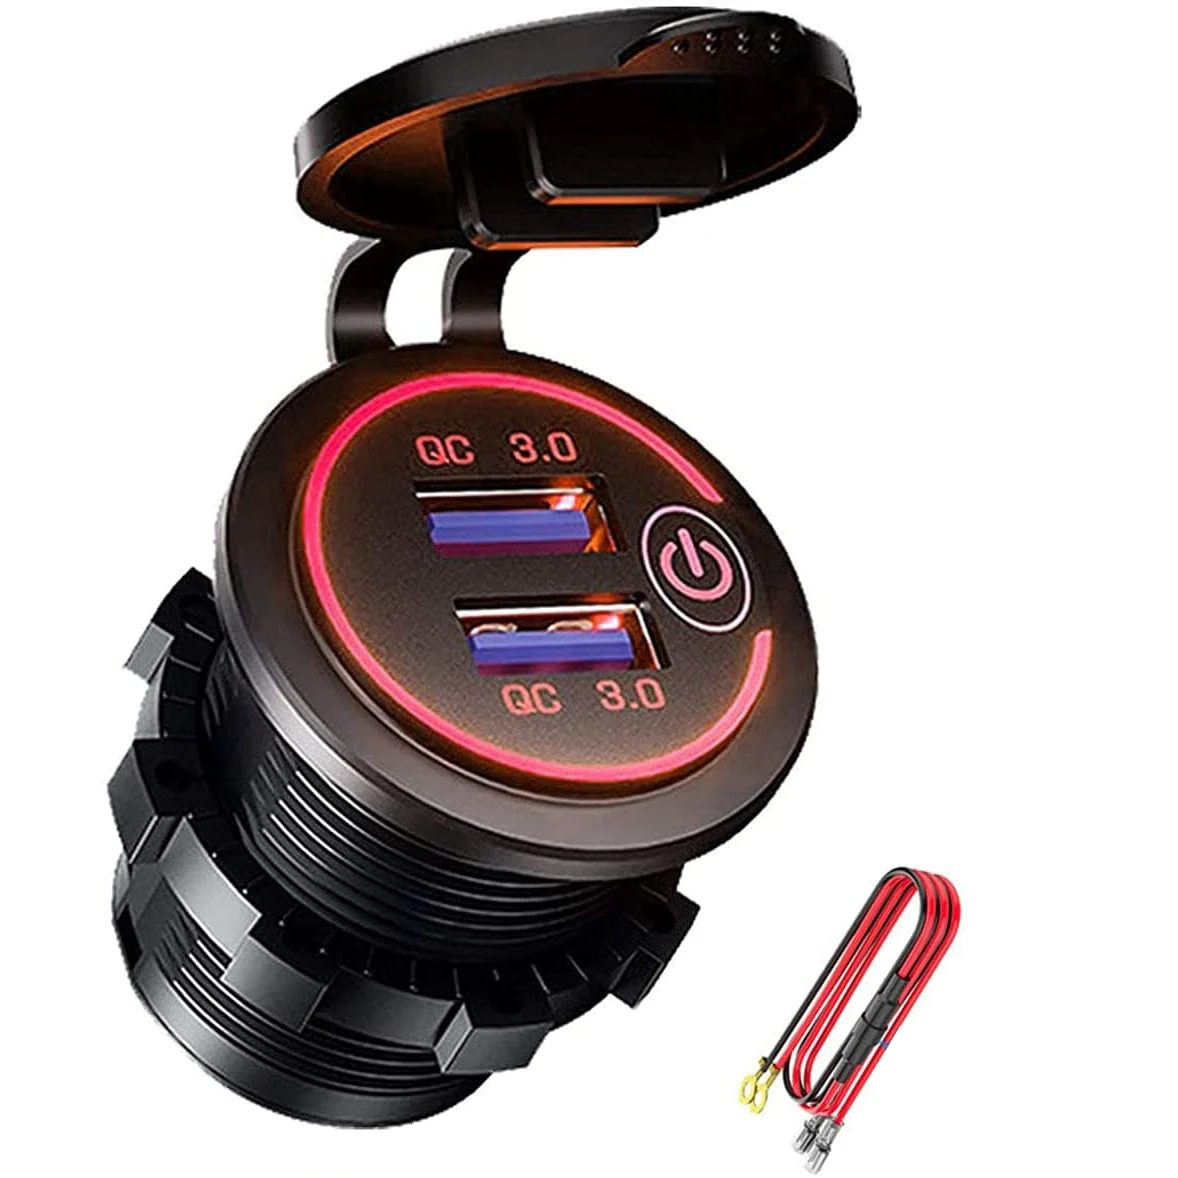 QC 3.0 Dual USB Charger Socket,Waterproof 12V/24V USB Outlet with Touch-Switch for Car, Marine,Boat,RV,Motorcycle,Red